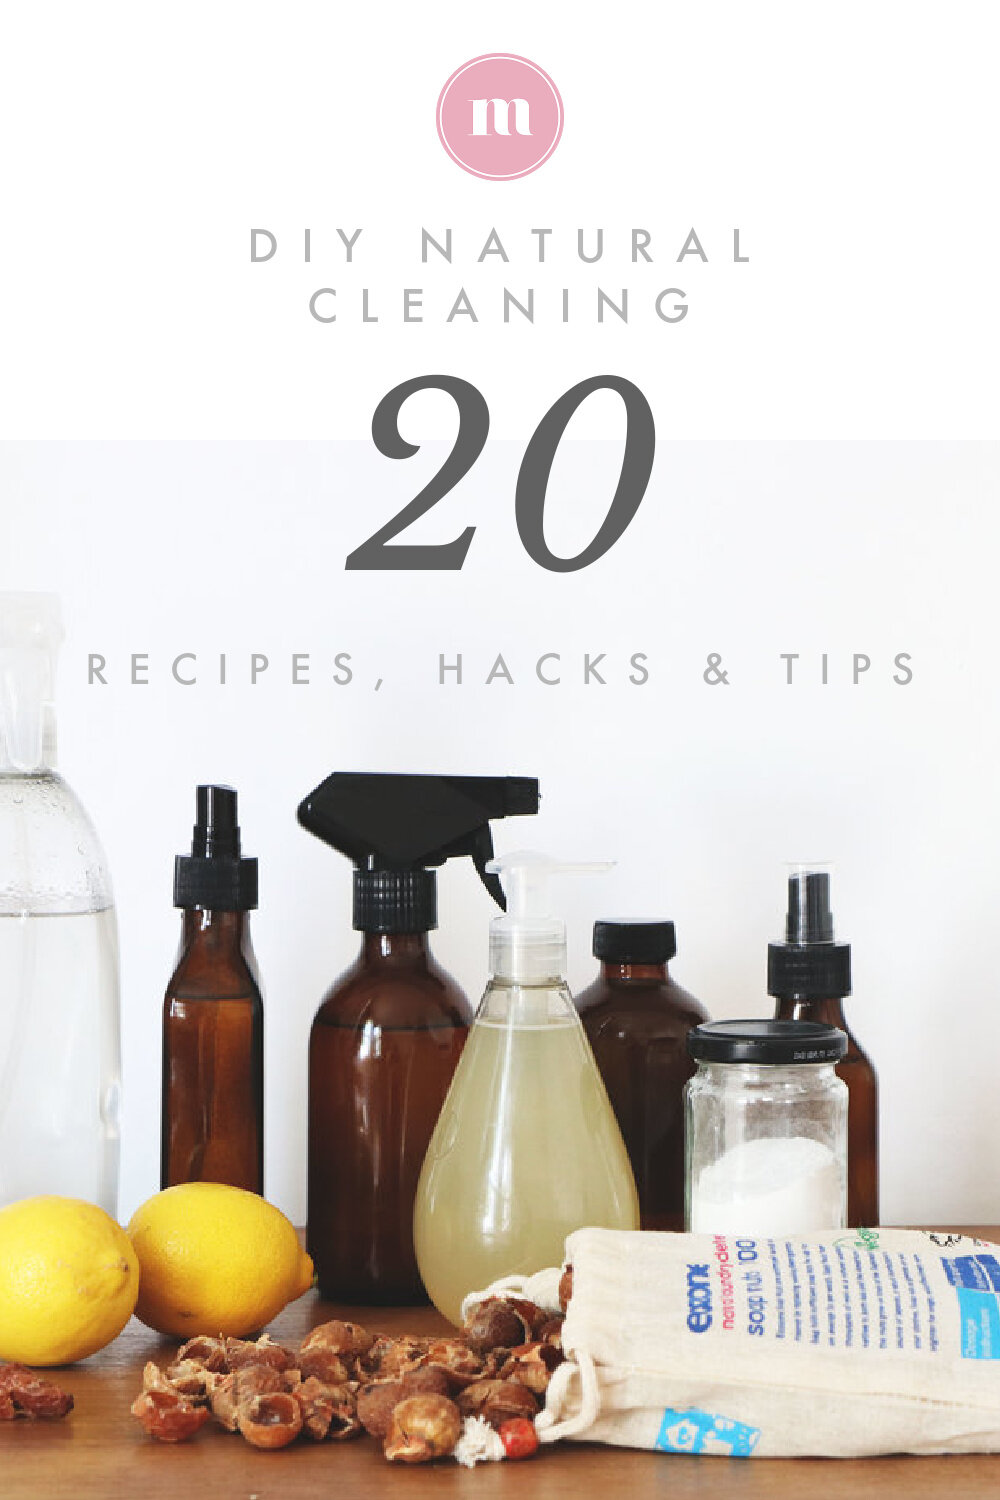 7 Cleaning Tips and Hacks and DIY Natural Cleaning Recipes - Home DIY